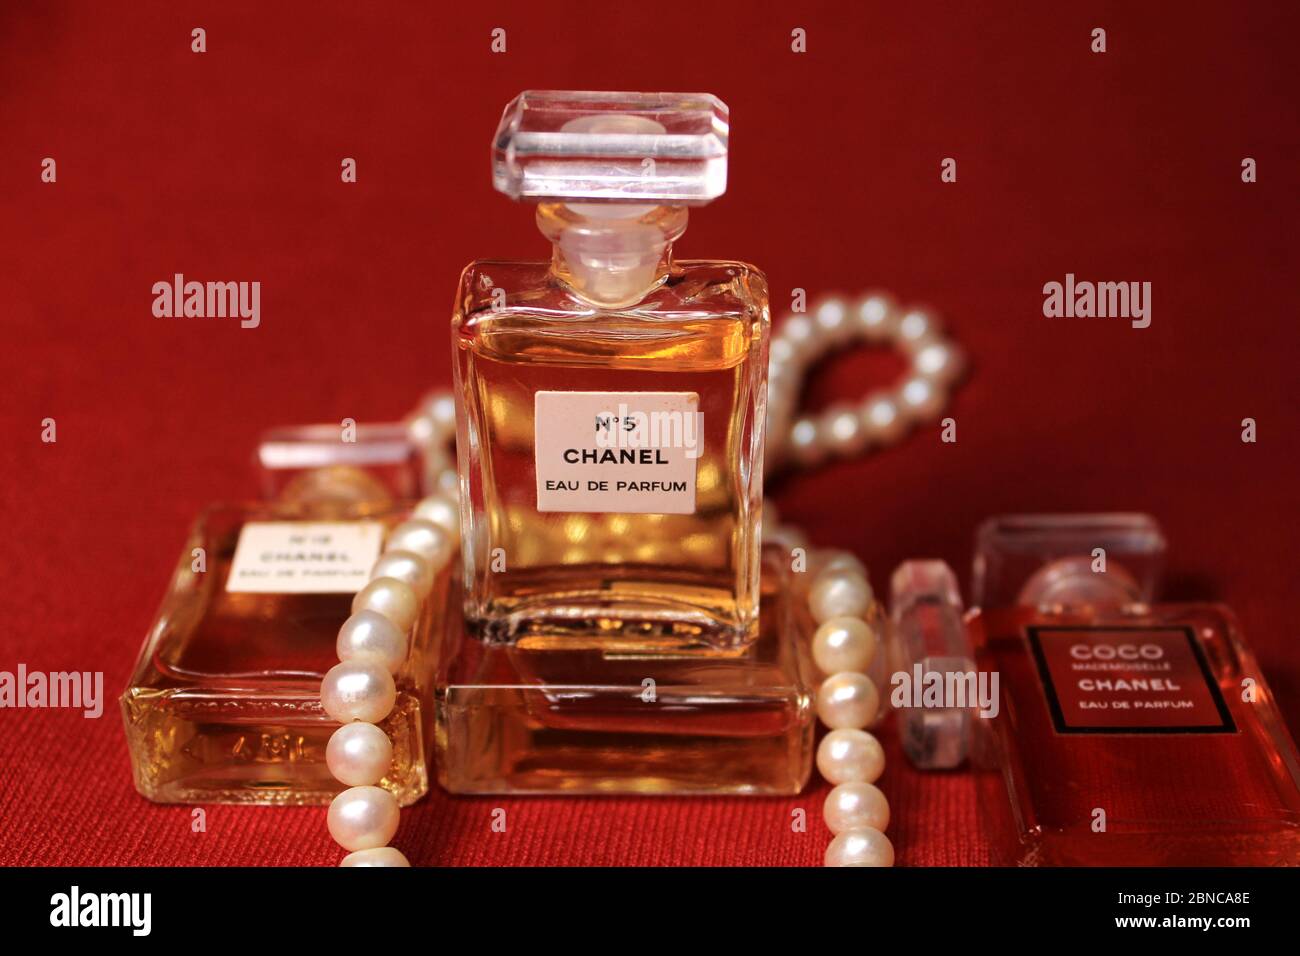 Kolkata, India on 13th May in 2020 : Chanel perfume bottle isolated on red  & blue background. Bottle with Coco Chanel perfume product Stock Photo -  Alamy